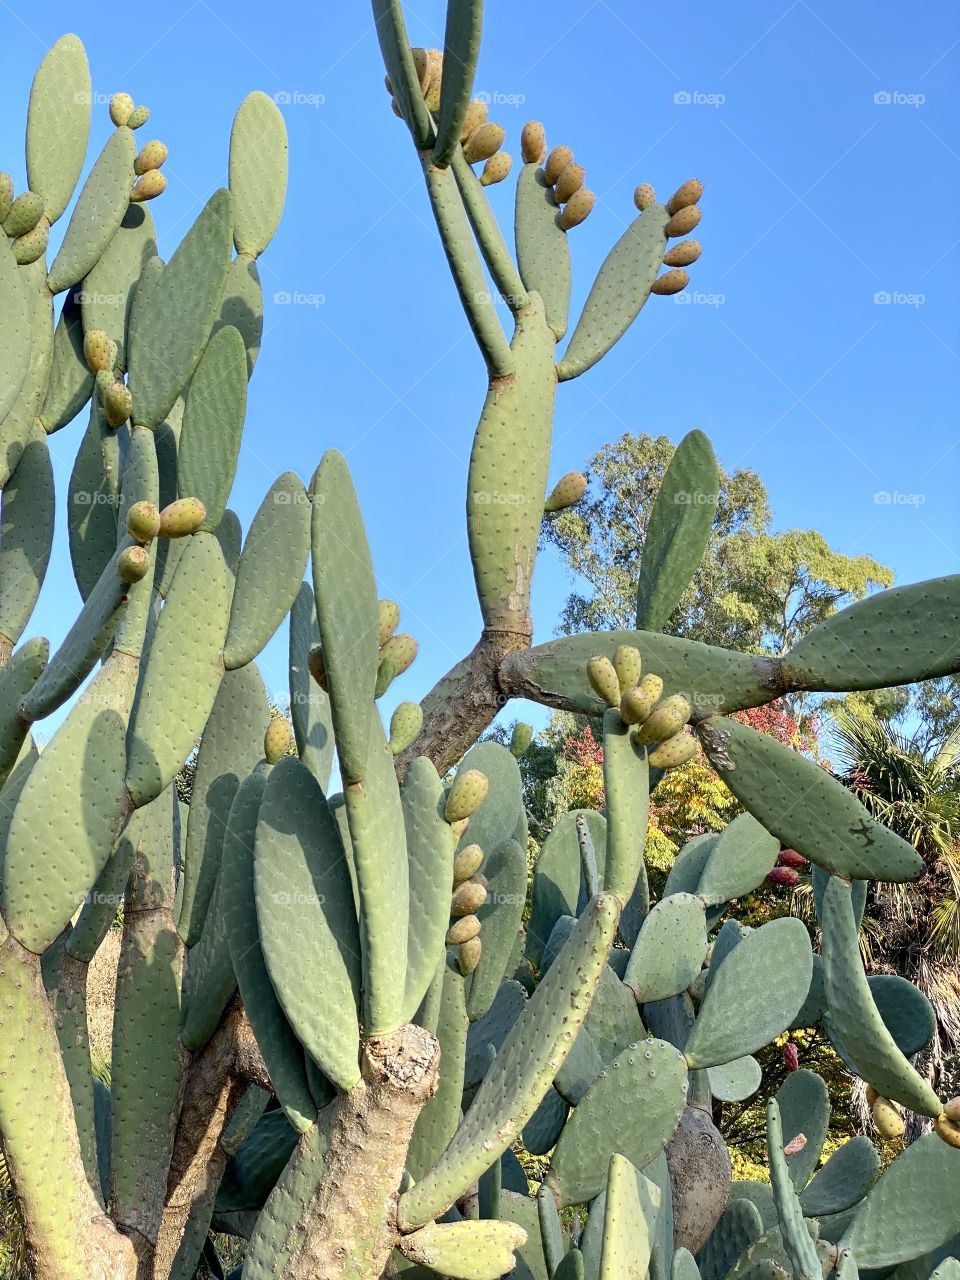 Cactus plant with flower buds 